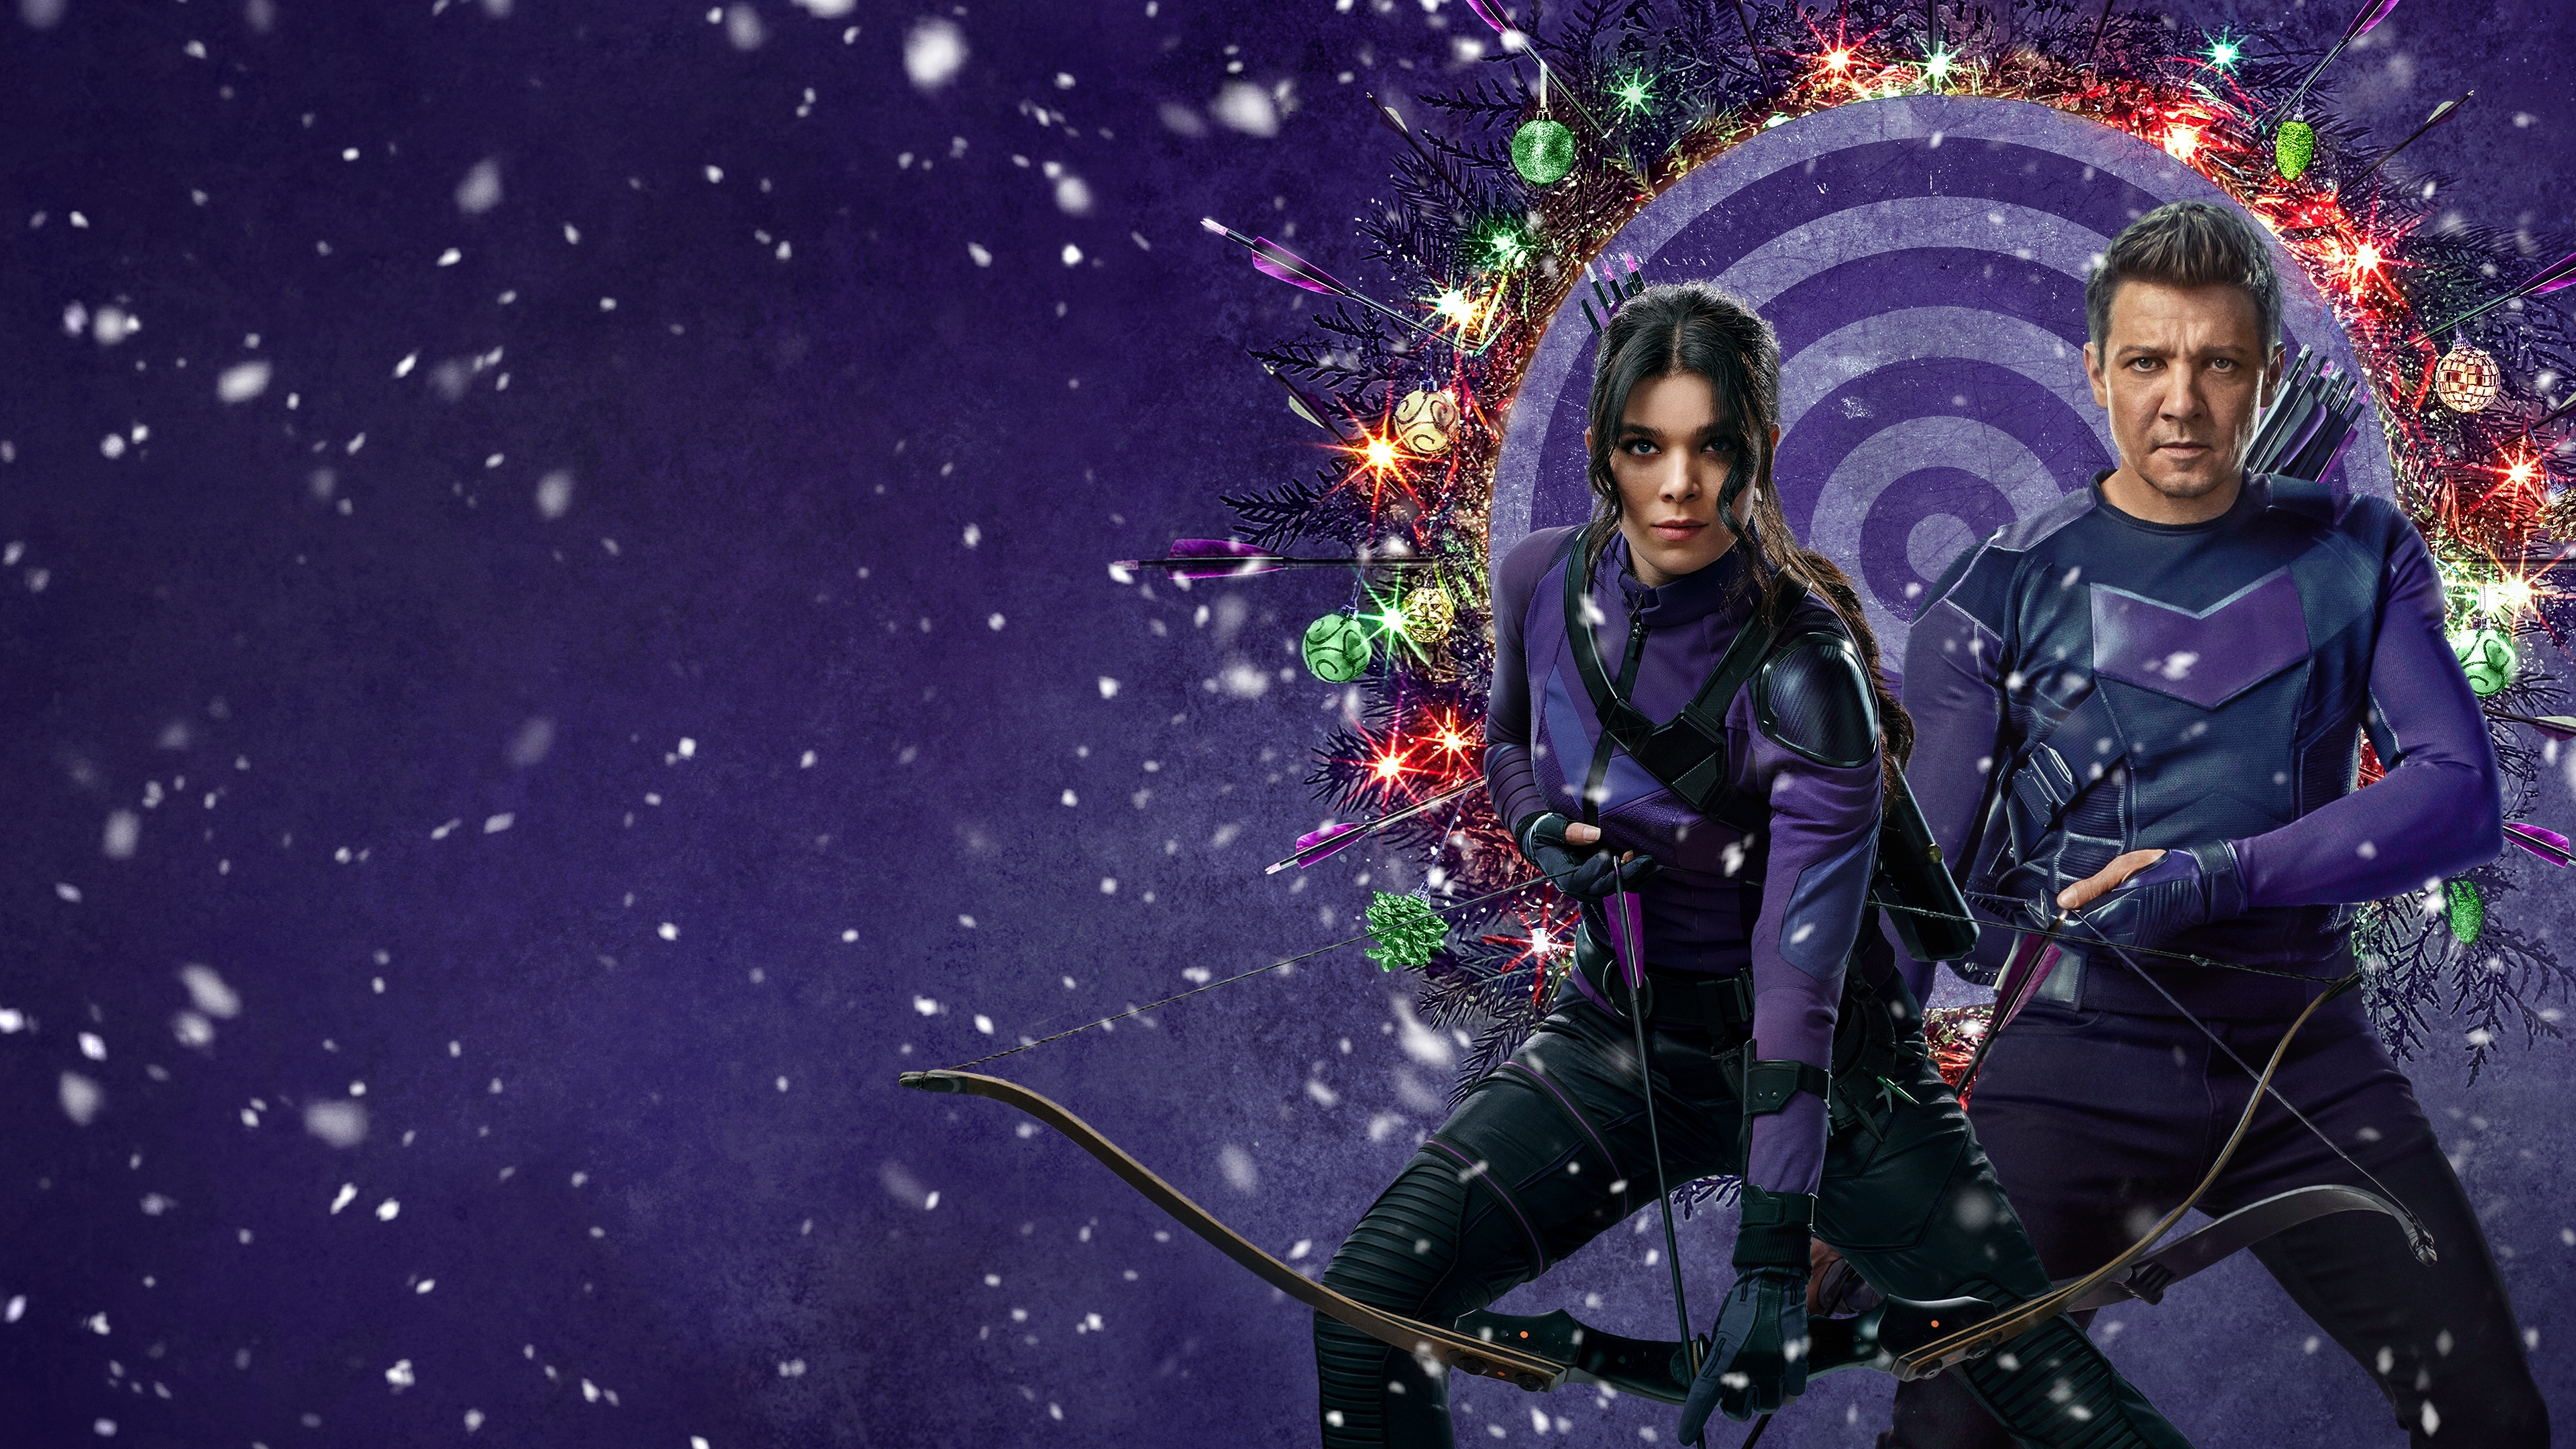 HD wallpaper, Hailee Steinfeld As Kate Bishop, Christmas Special, So This Is Christmas, Hawkeye, Jeremy Renner As Clint Barton